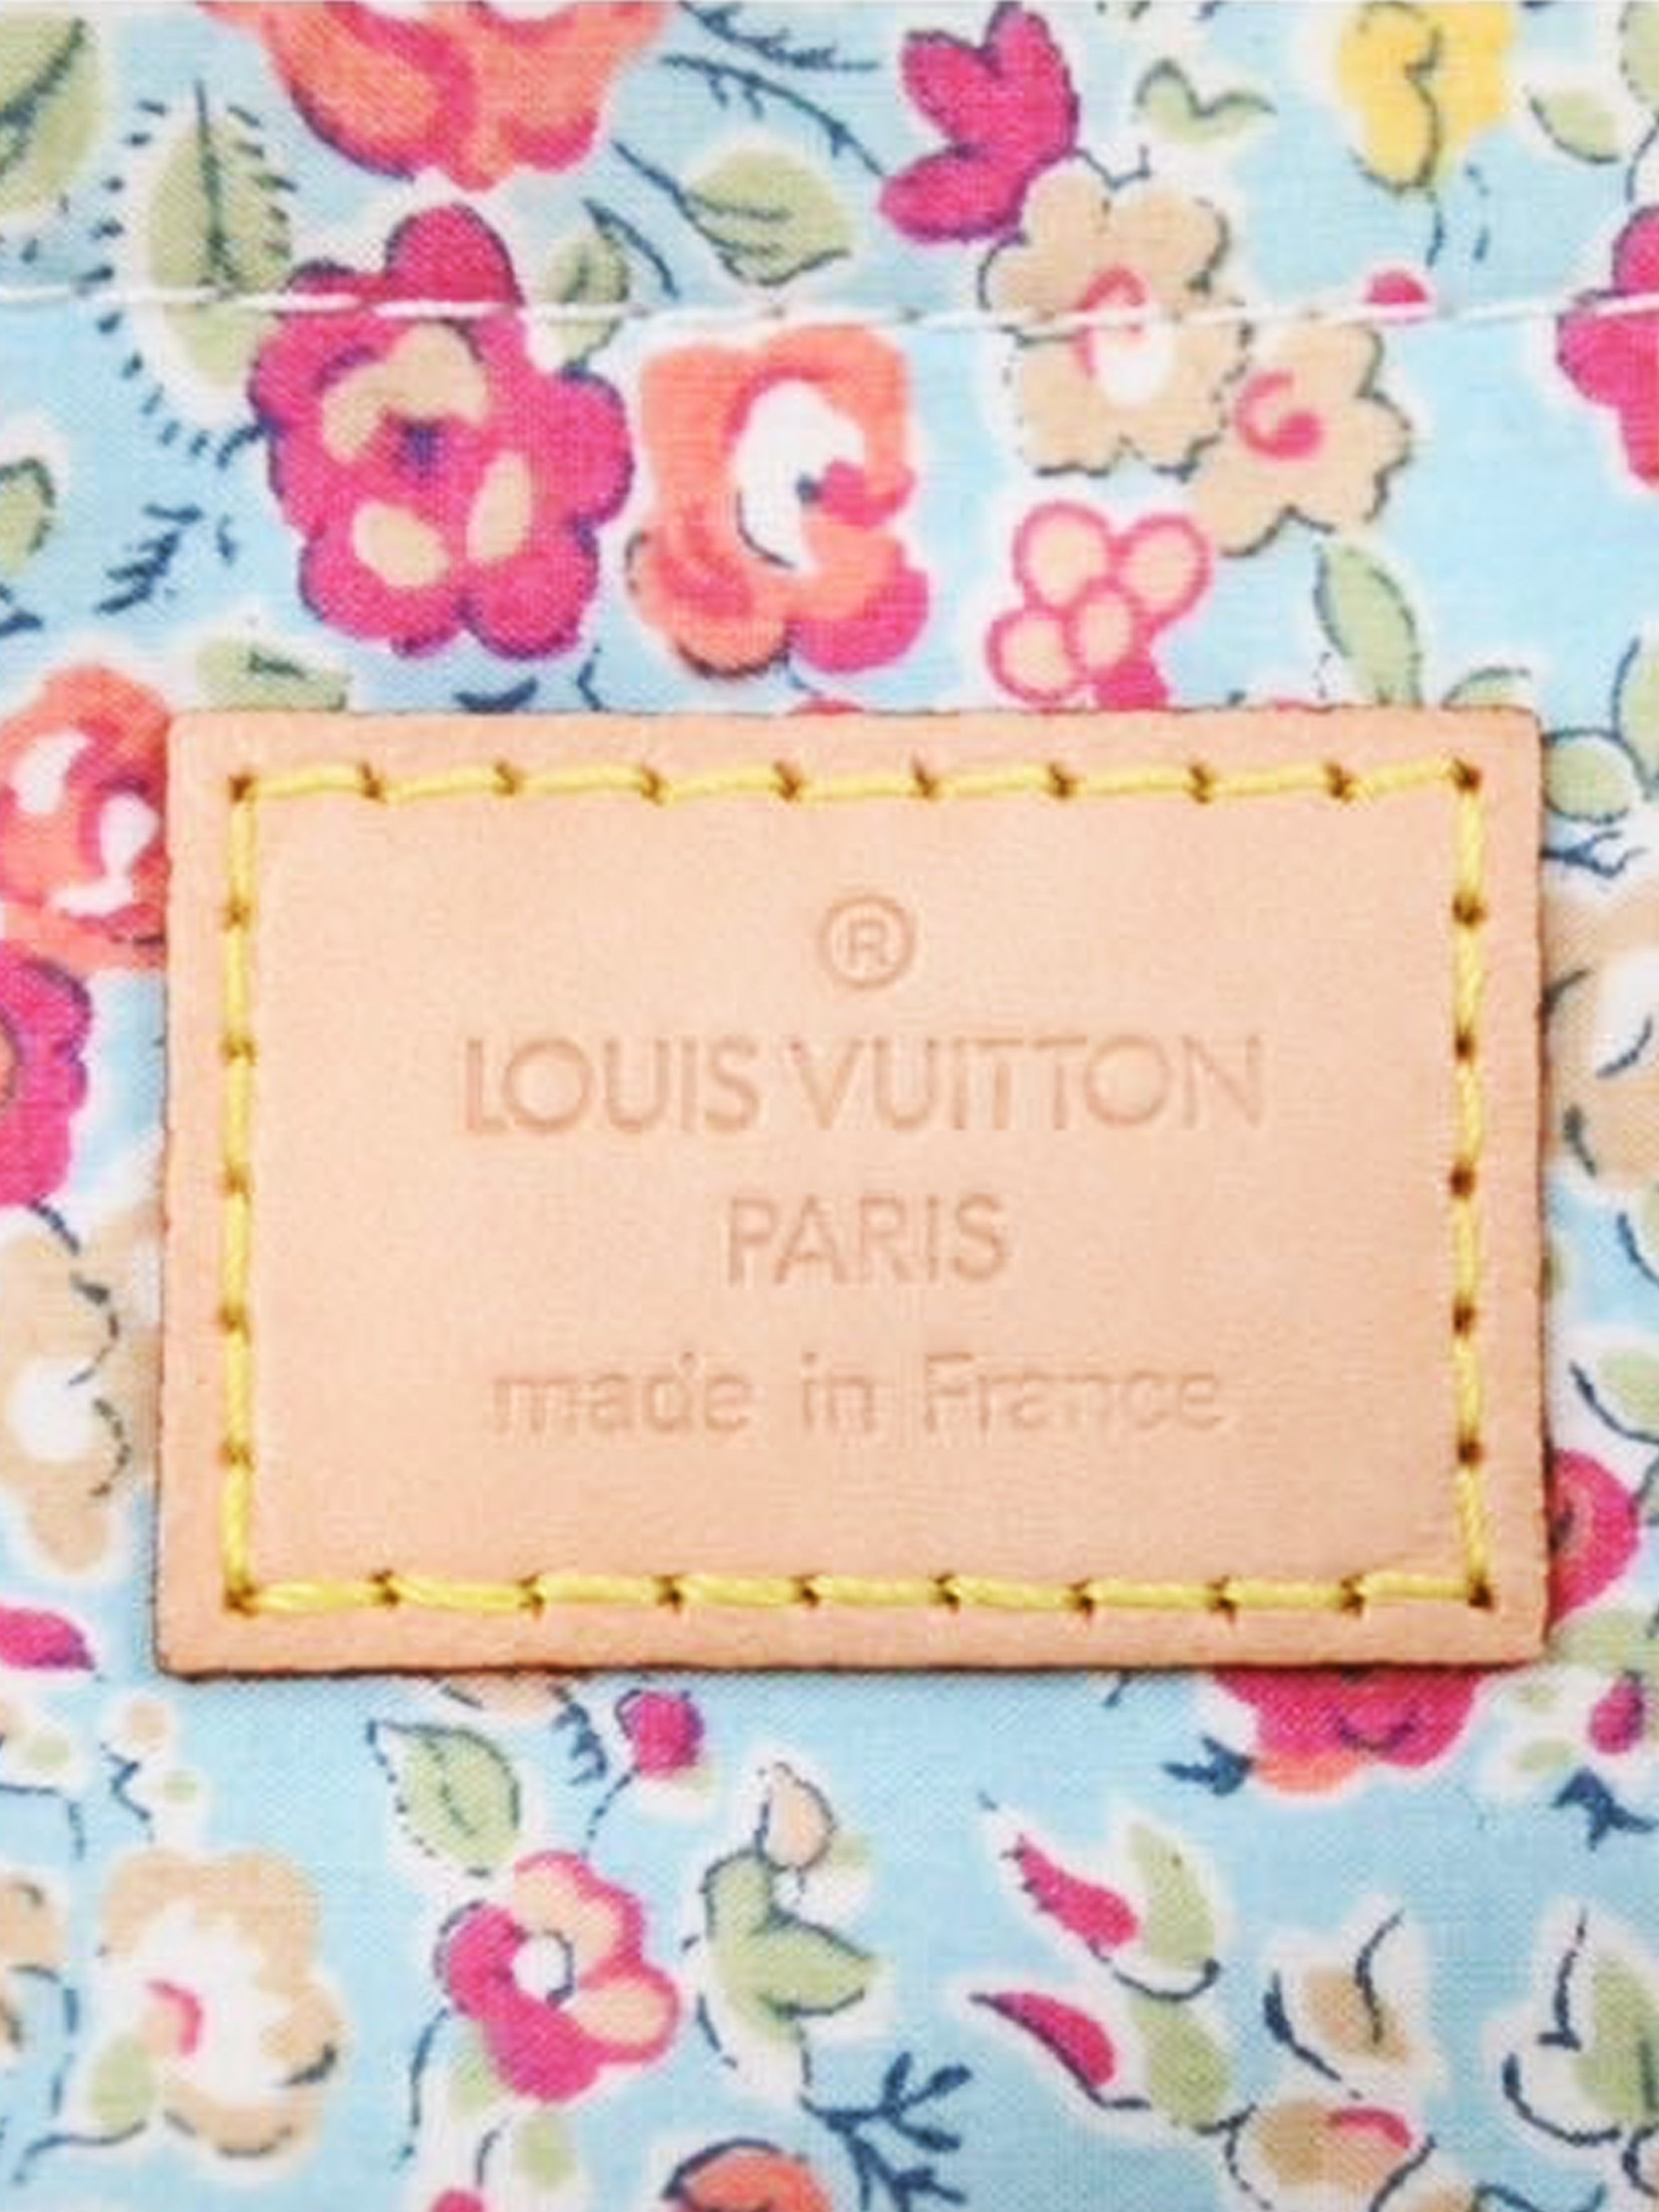 MALU on X: Louis Vuitton Patchwork Bag (2007) - It was called